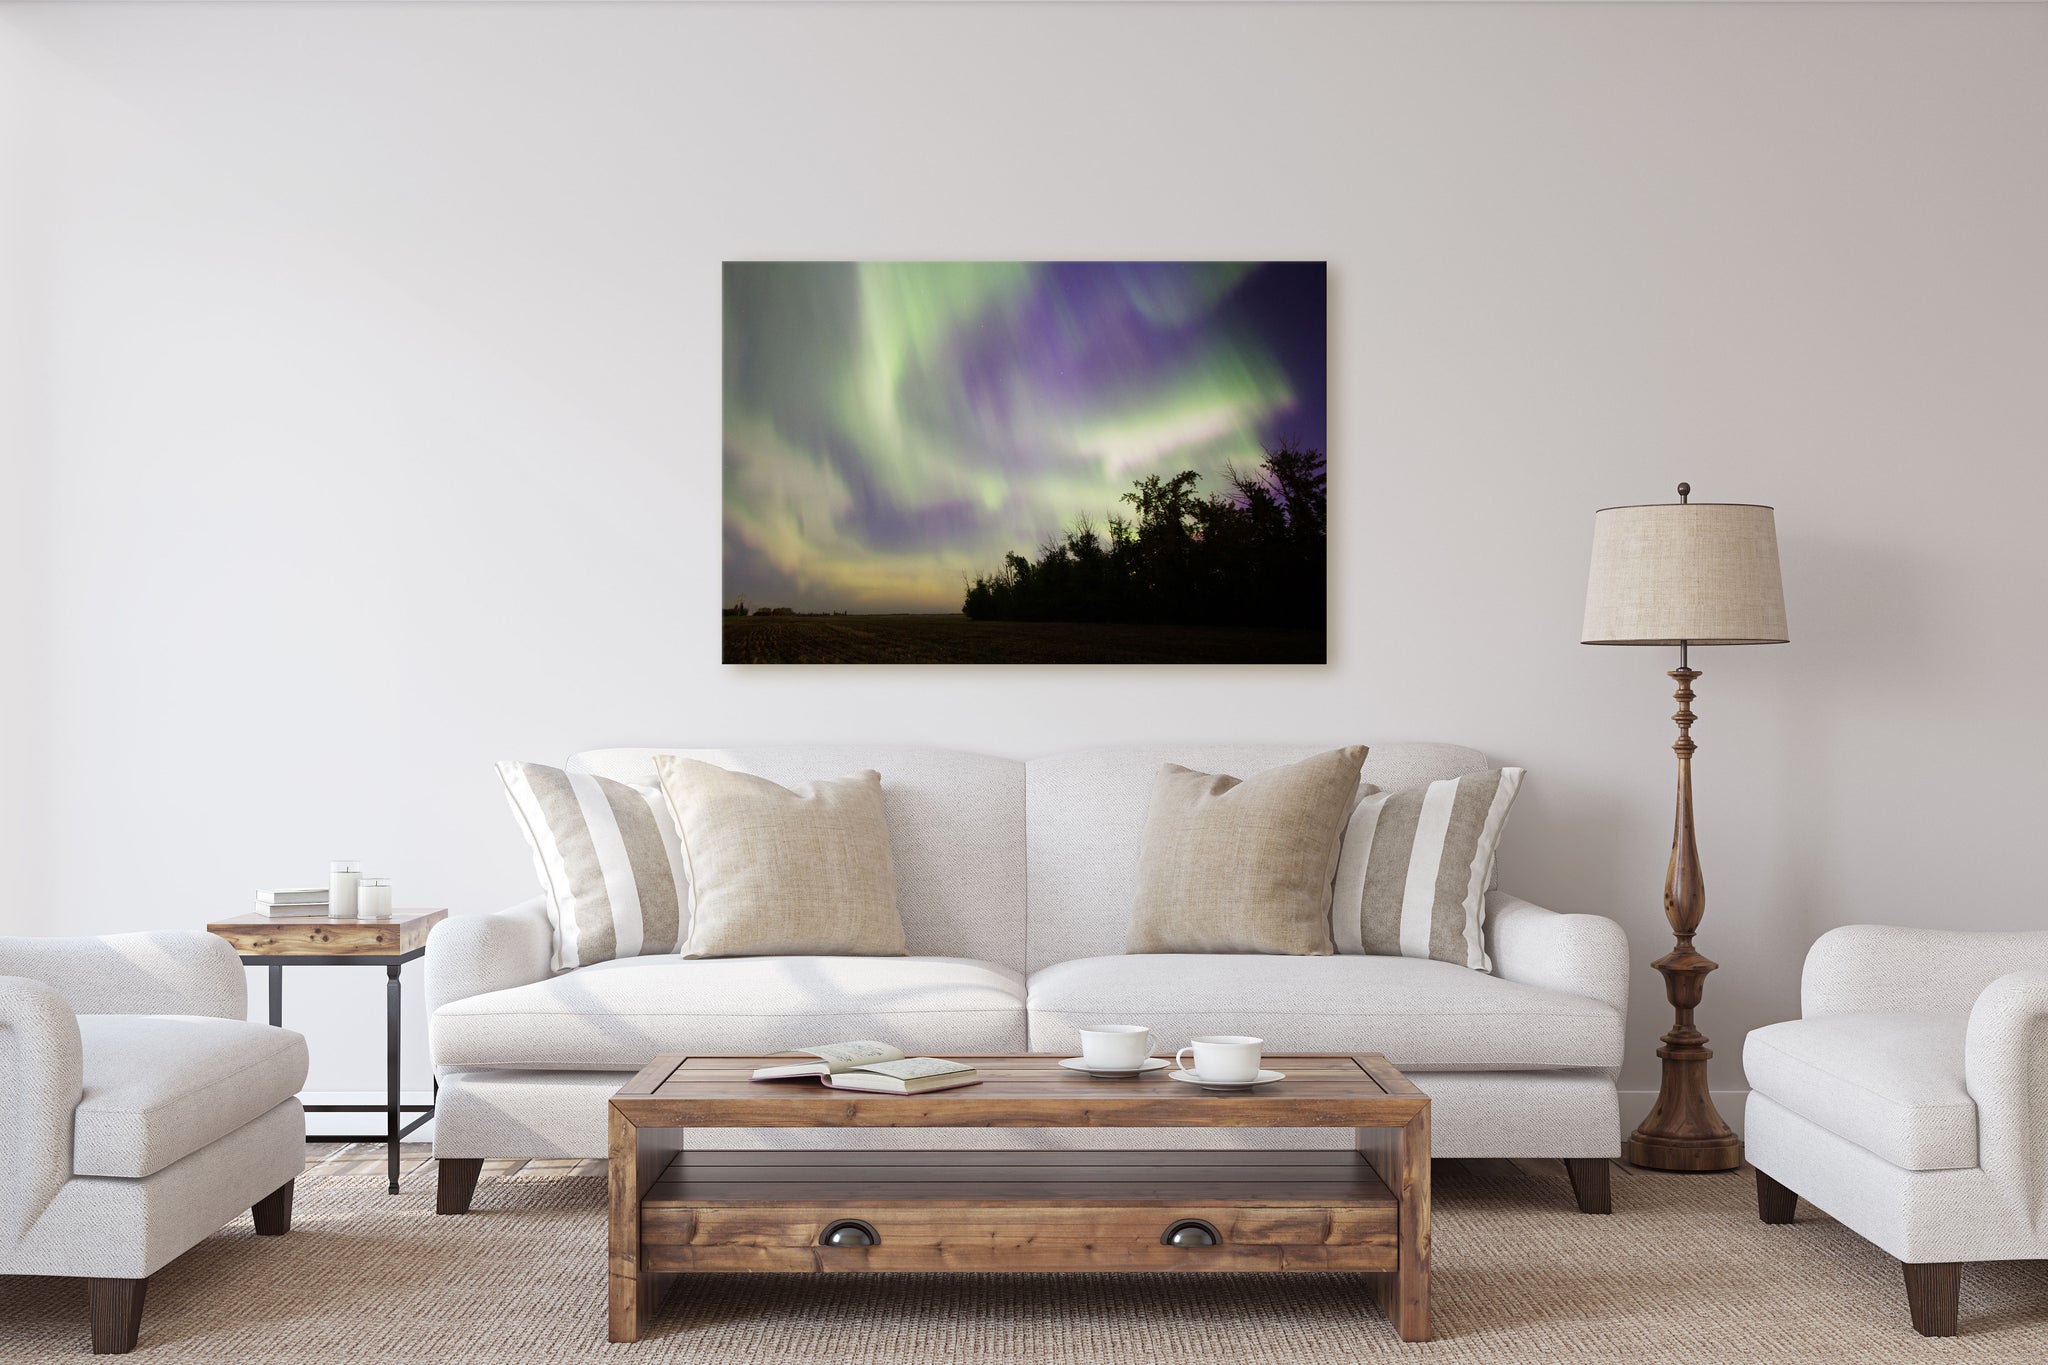 Limited Edition Gallery Wrapped Canvas of Northern Lights